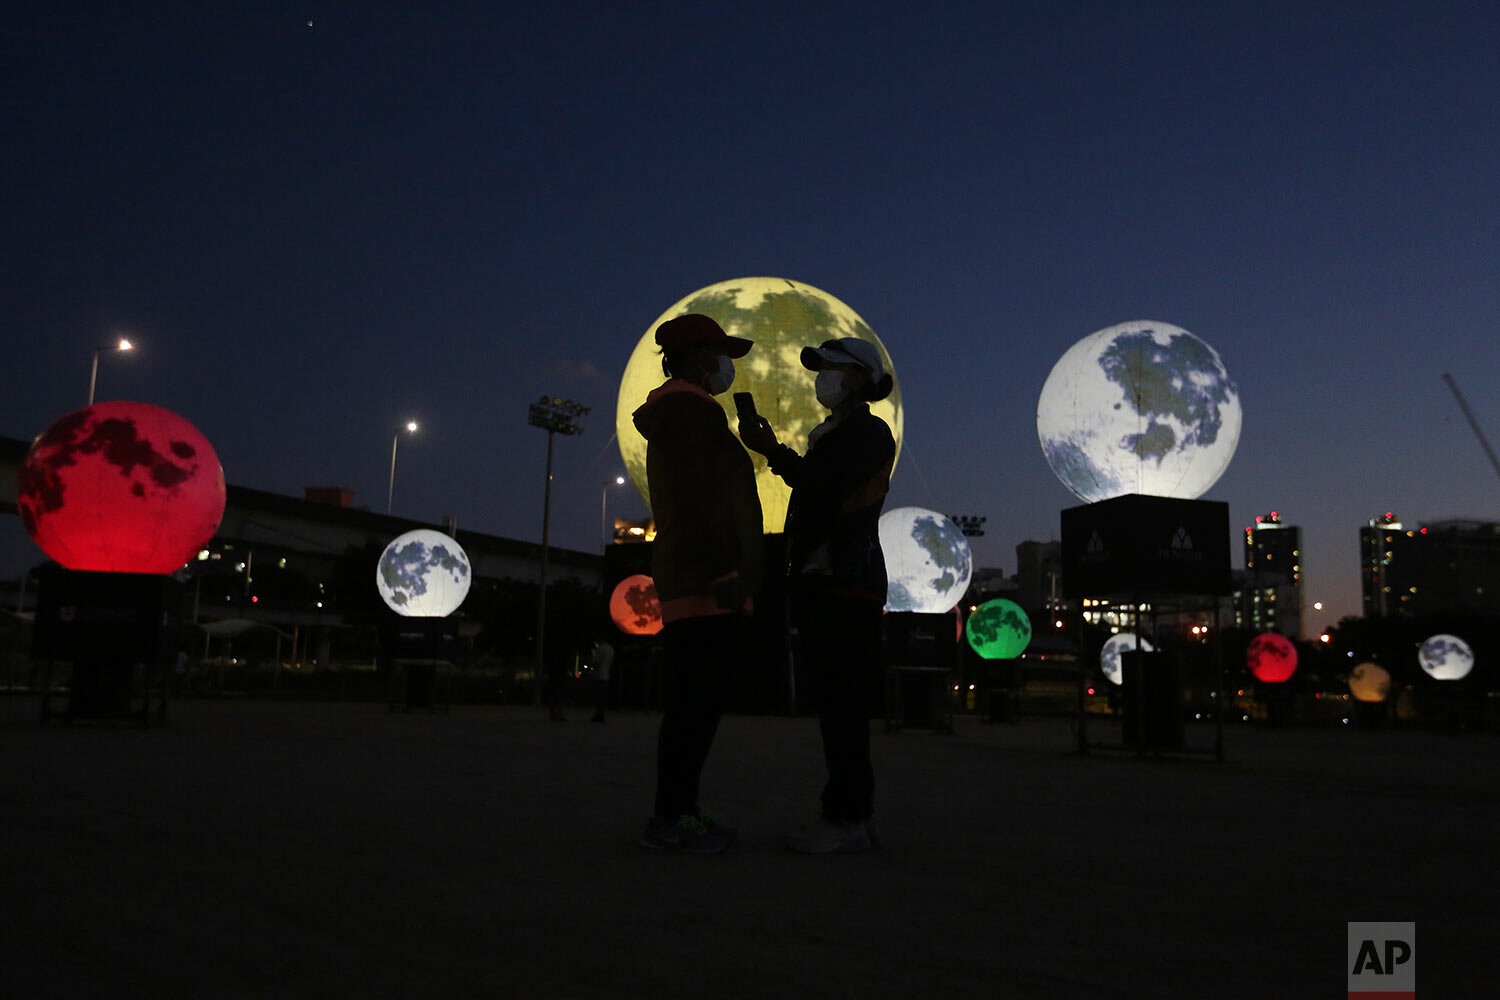  Women stand next to glowing full moon installations at a park in Seoul, South Korea, Friday, Sept. 18, 2020. (AP Photo/Ahn Young-joon) 